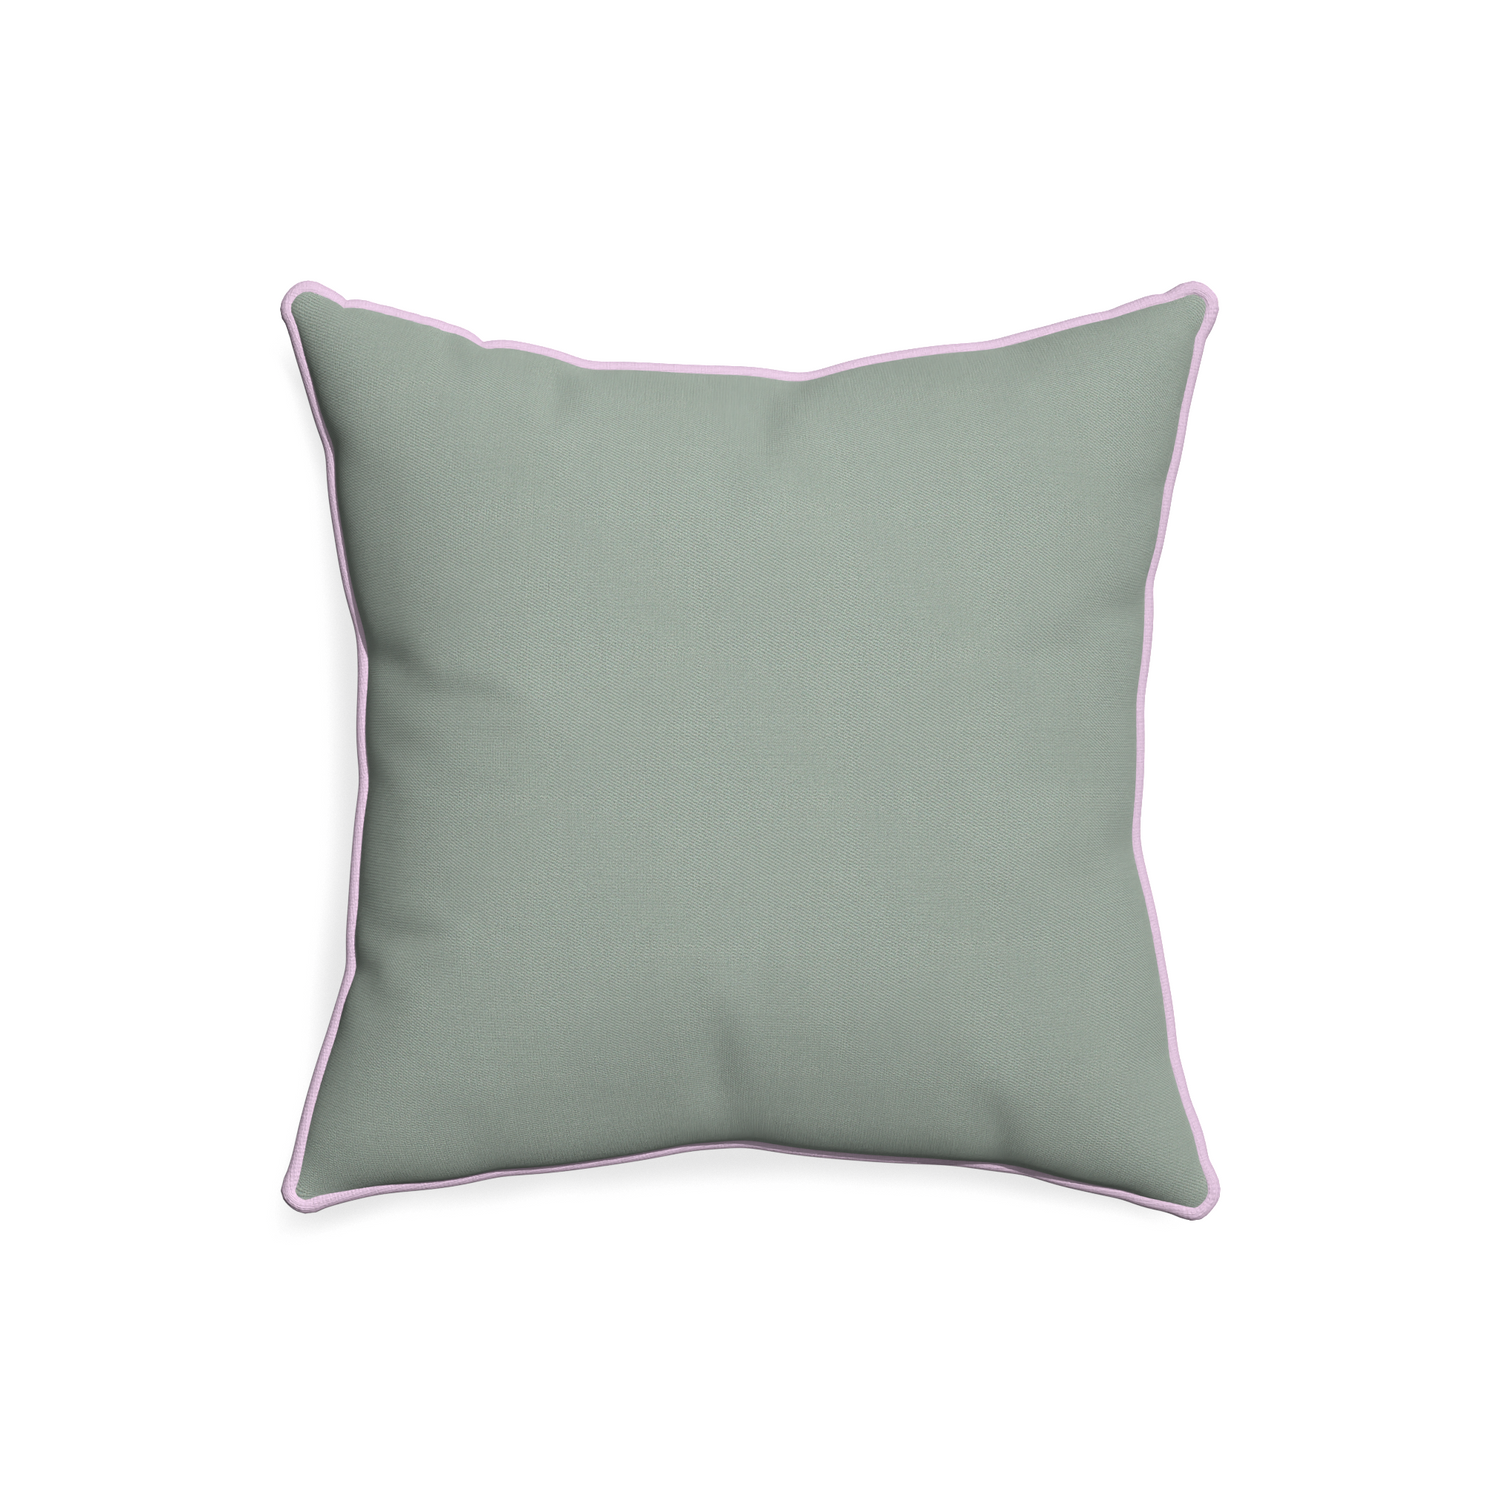 20-square sage custom sage green cottonpillow with l piping on white background